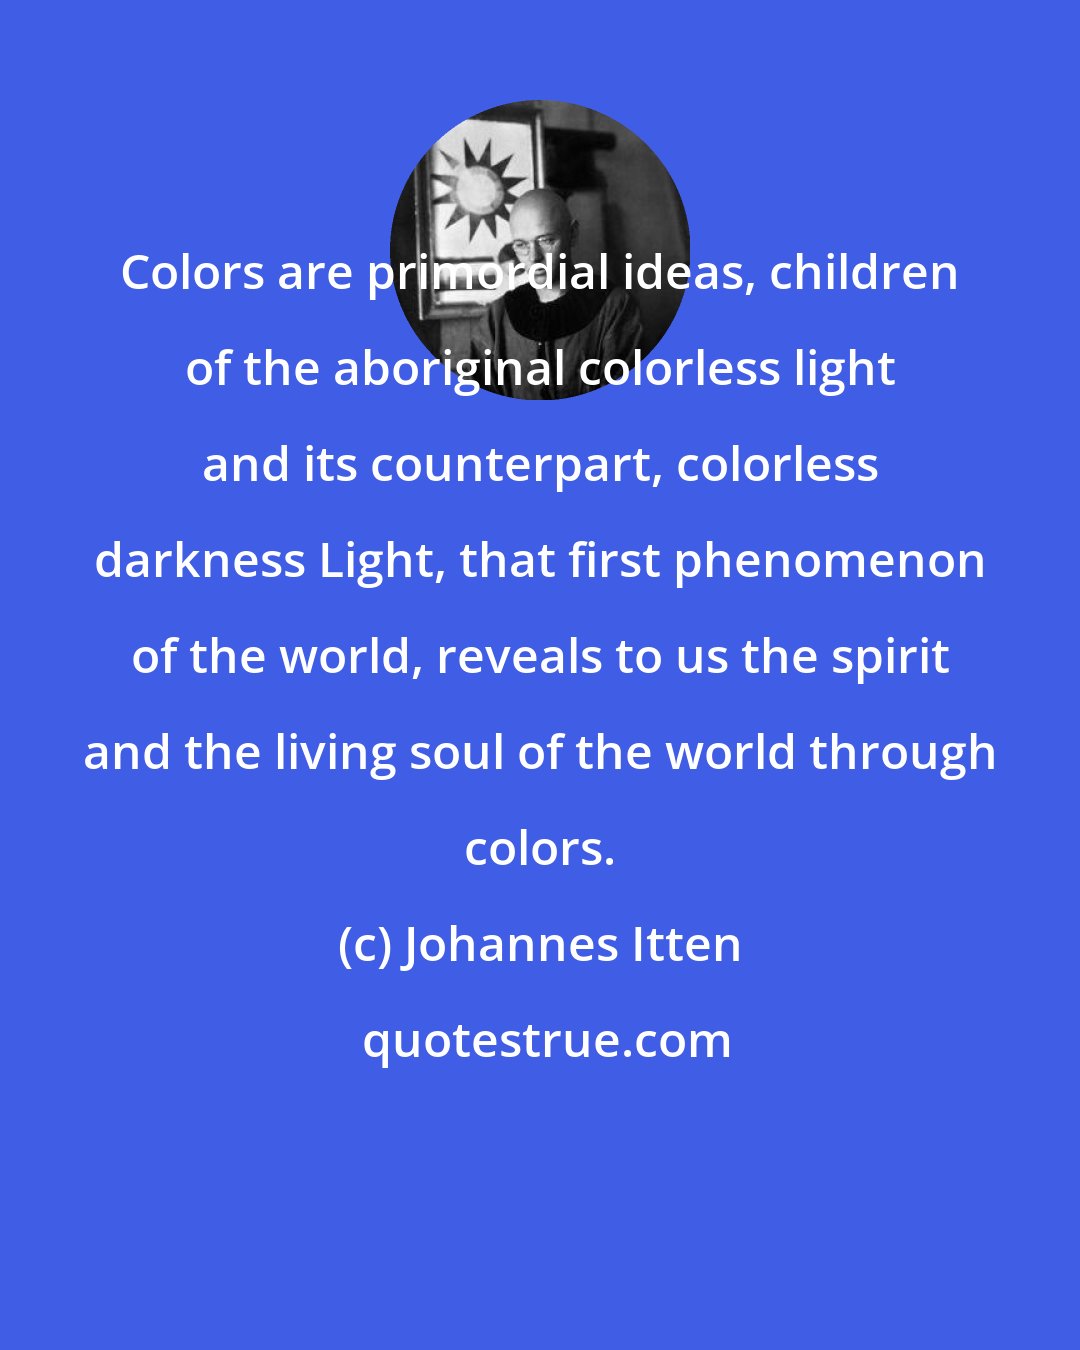 Johannes Itten: Colors are primordial ideas, children of the aboriginal colorless light and its counterpart, colorless darkness Light, that first phenomenon of the world, reveals to us the spirit and the living soul of the world through colors.